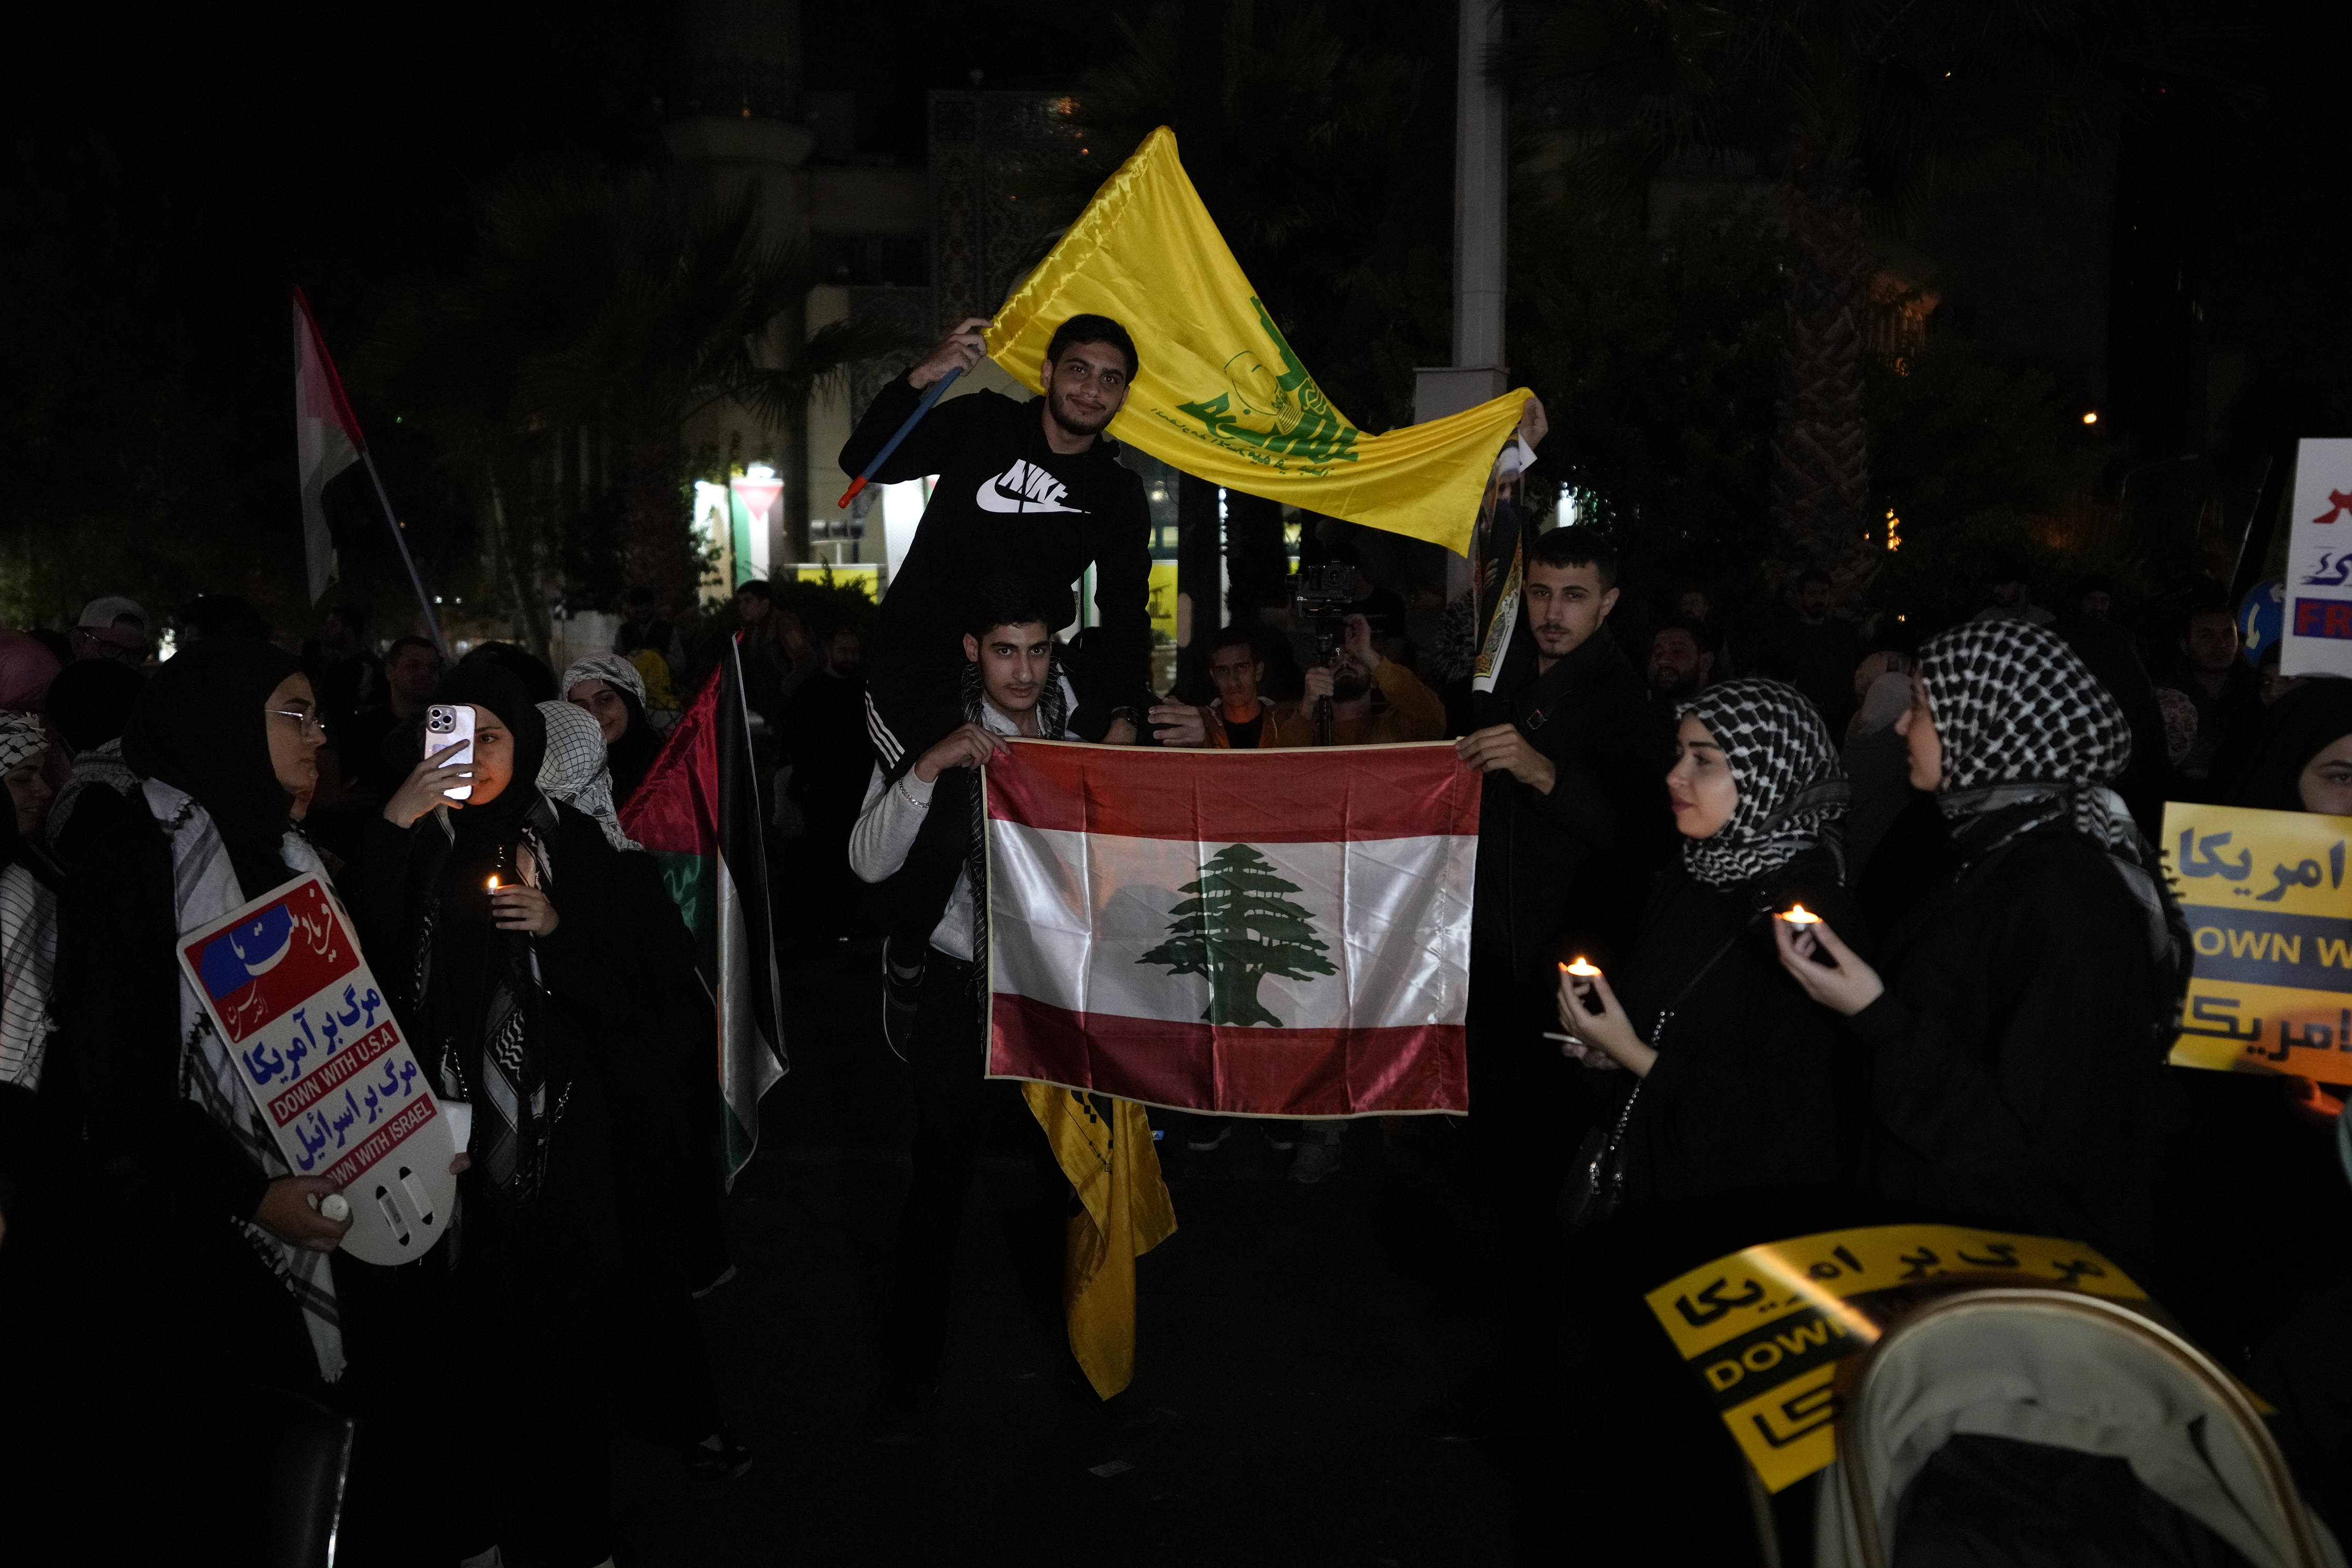 Lebanese students, living in Iran, hold Lebanon's militant Hezbollah group flag, top, and their country's national flag during a pro-Palestinian gathering at the Felestin (Palestine) Sq. in Tehran, Iran